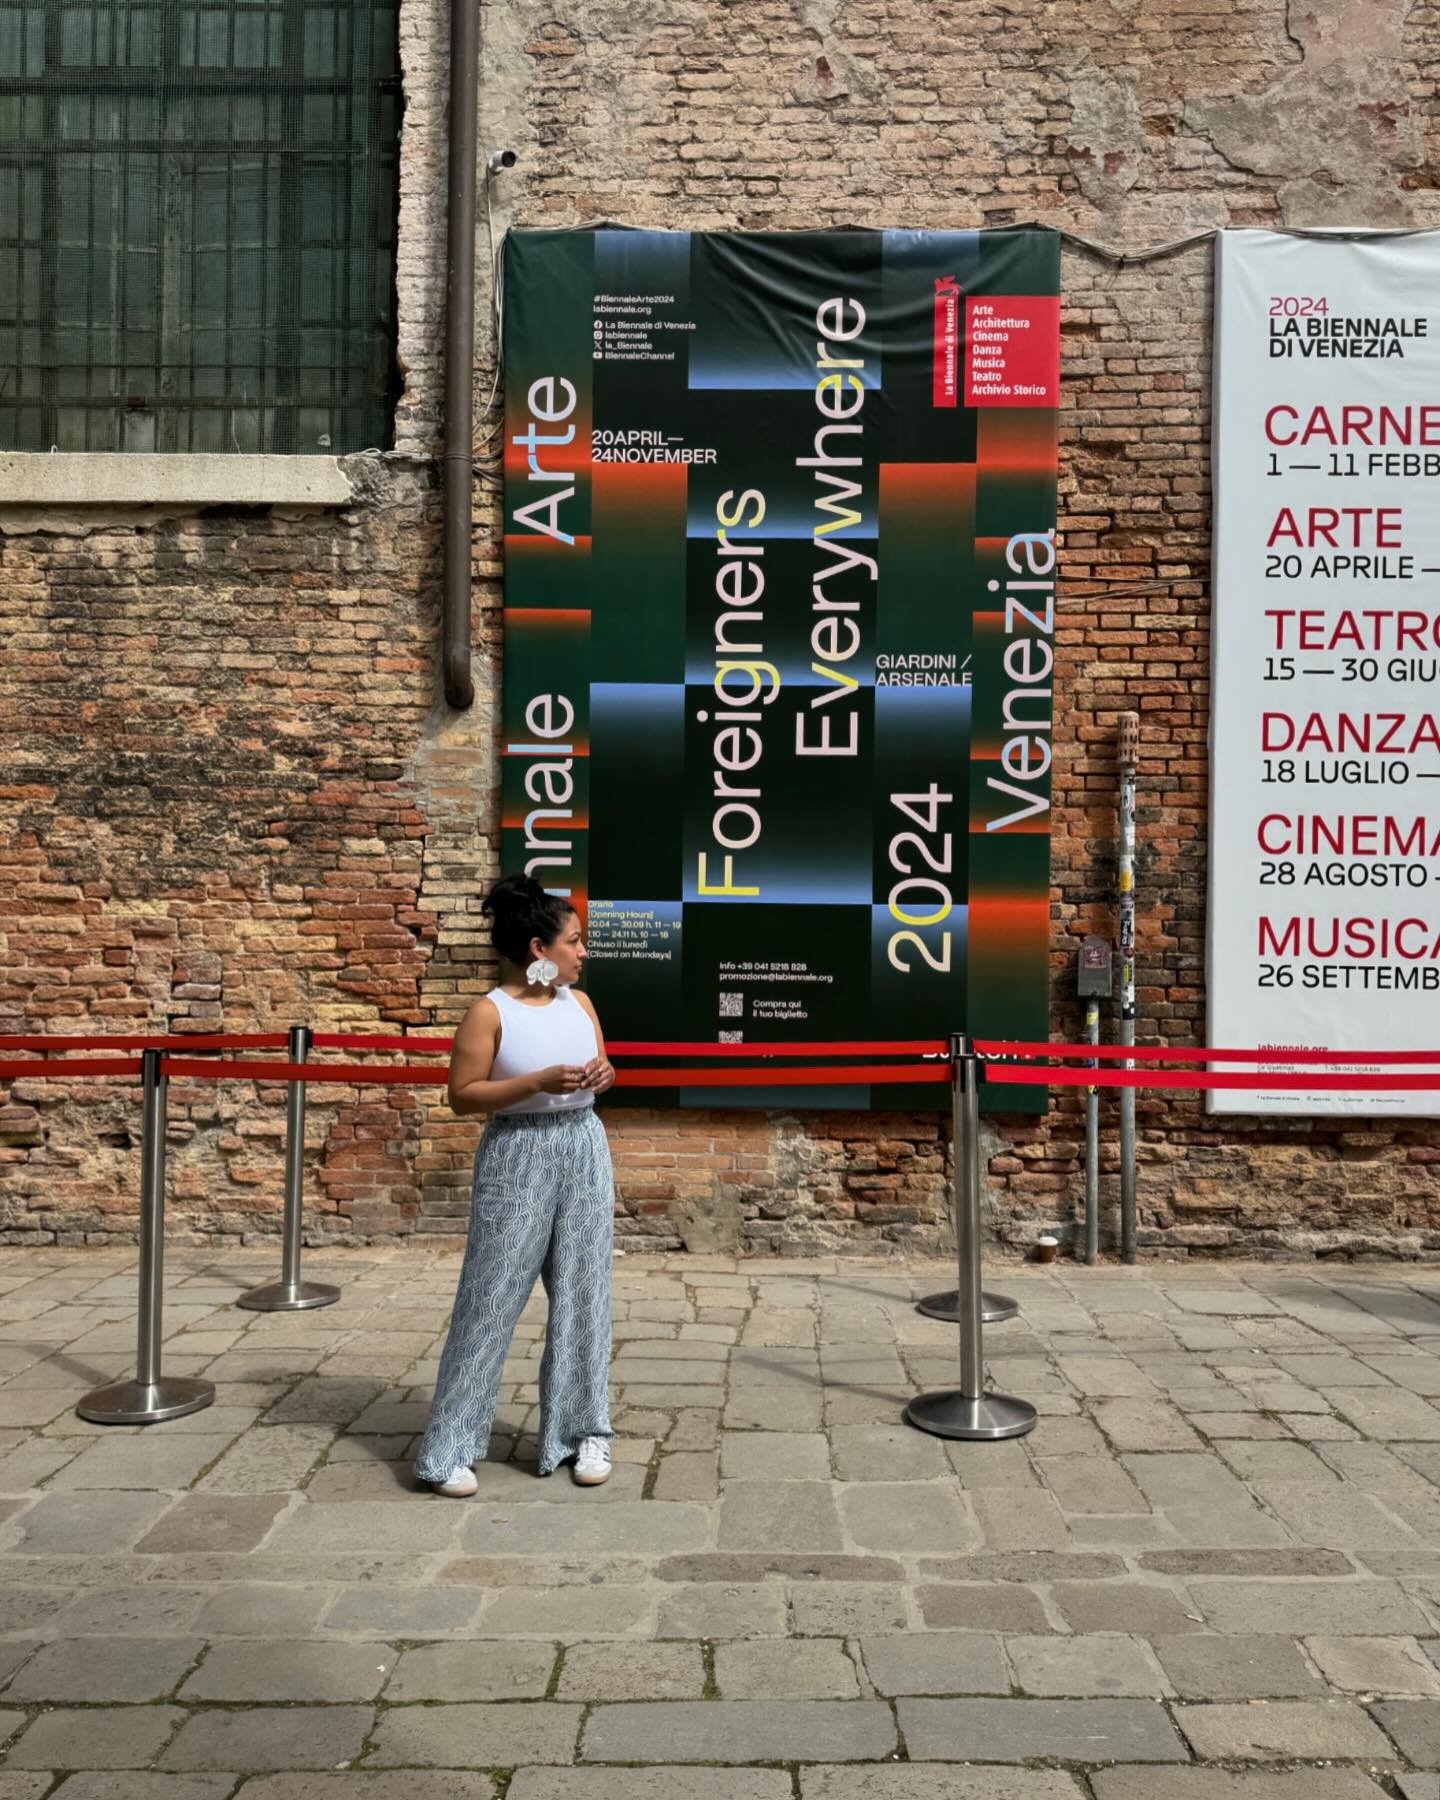 2024 Venice Biennale Diaries: Final Compilation of #VeniceBiennale: Foreigners Everywhere - Stranieri Ovunque curated by @adrianopedrosa. ✨

1️⃣ Entrance outside the Arsenale 
2️⃣ Mataaho Collective - &ldquo;Takapav&rdquo; at the Arsenale
3️⃣ Bolivia